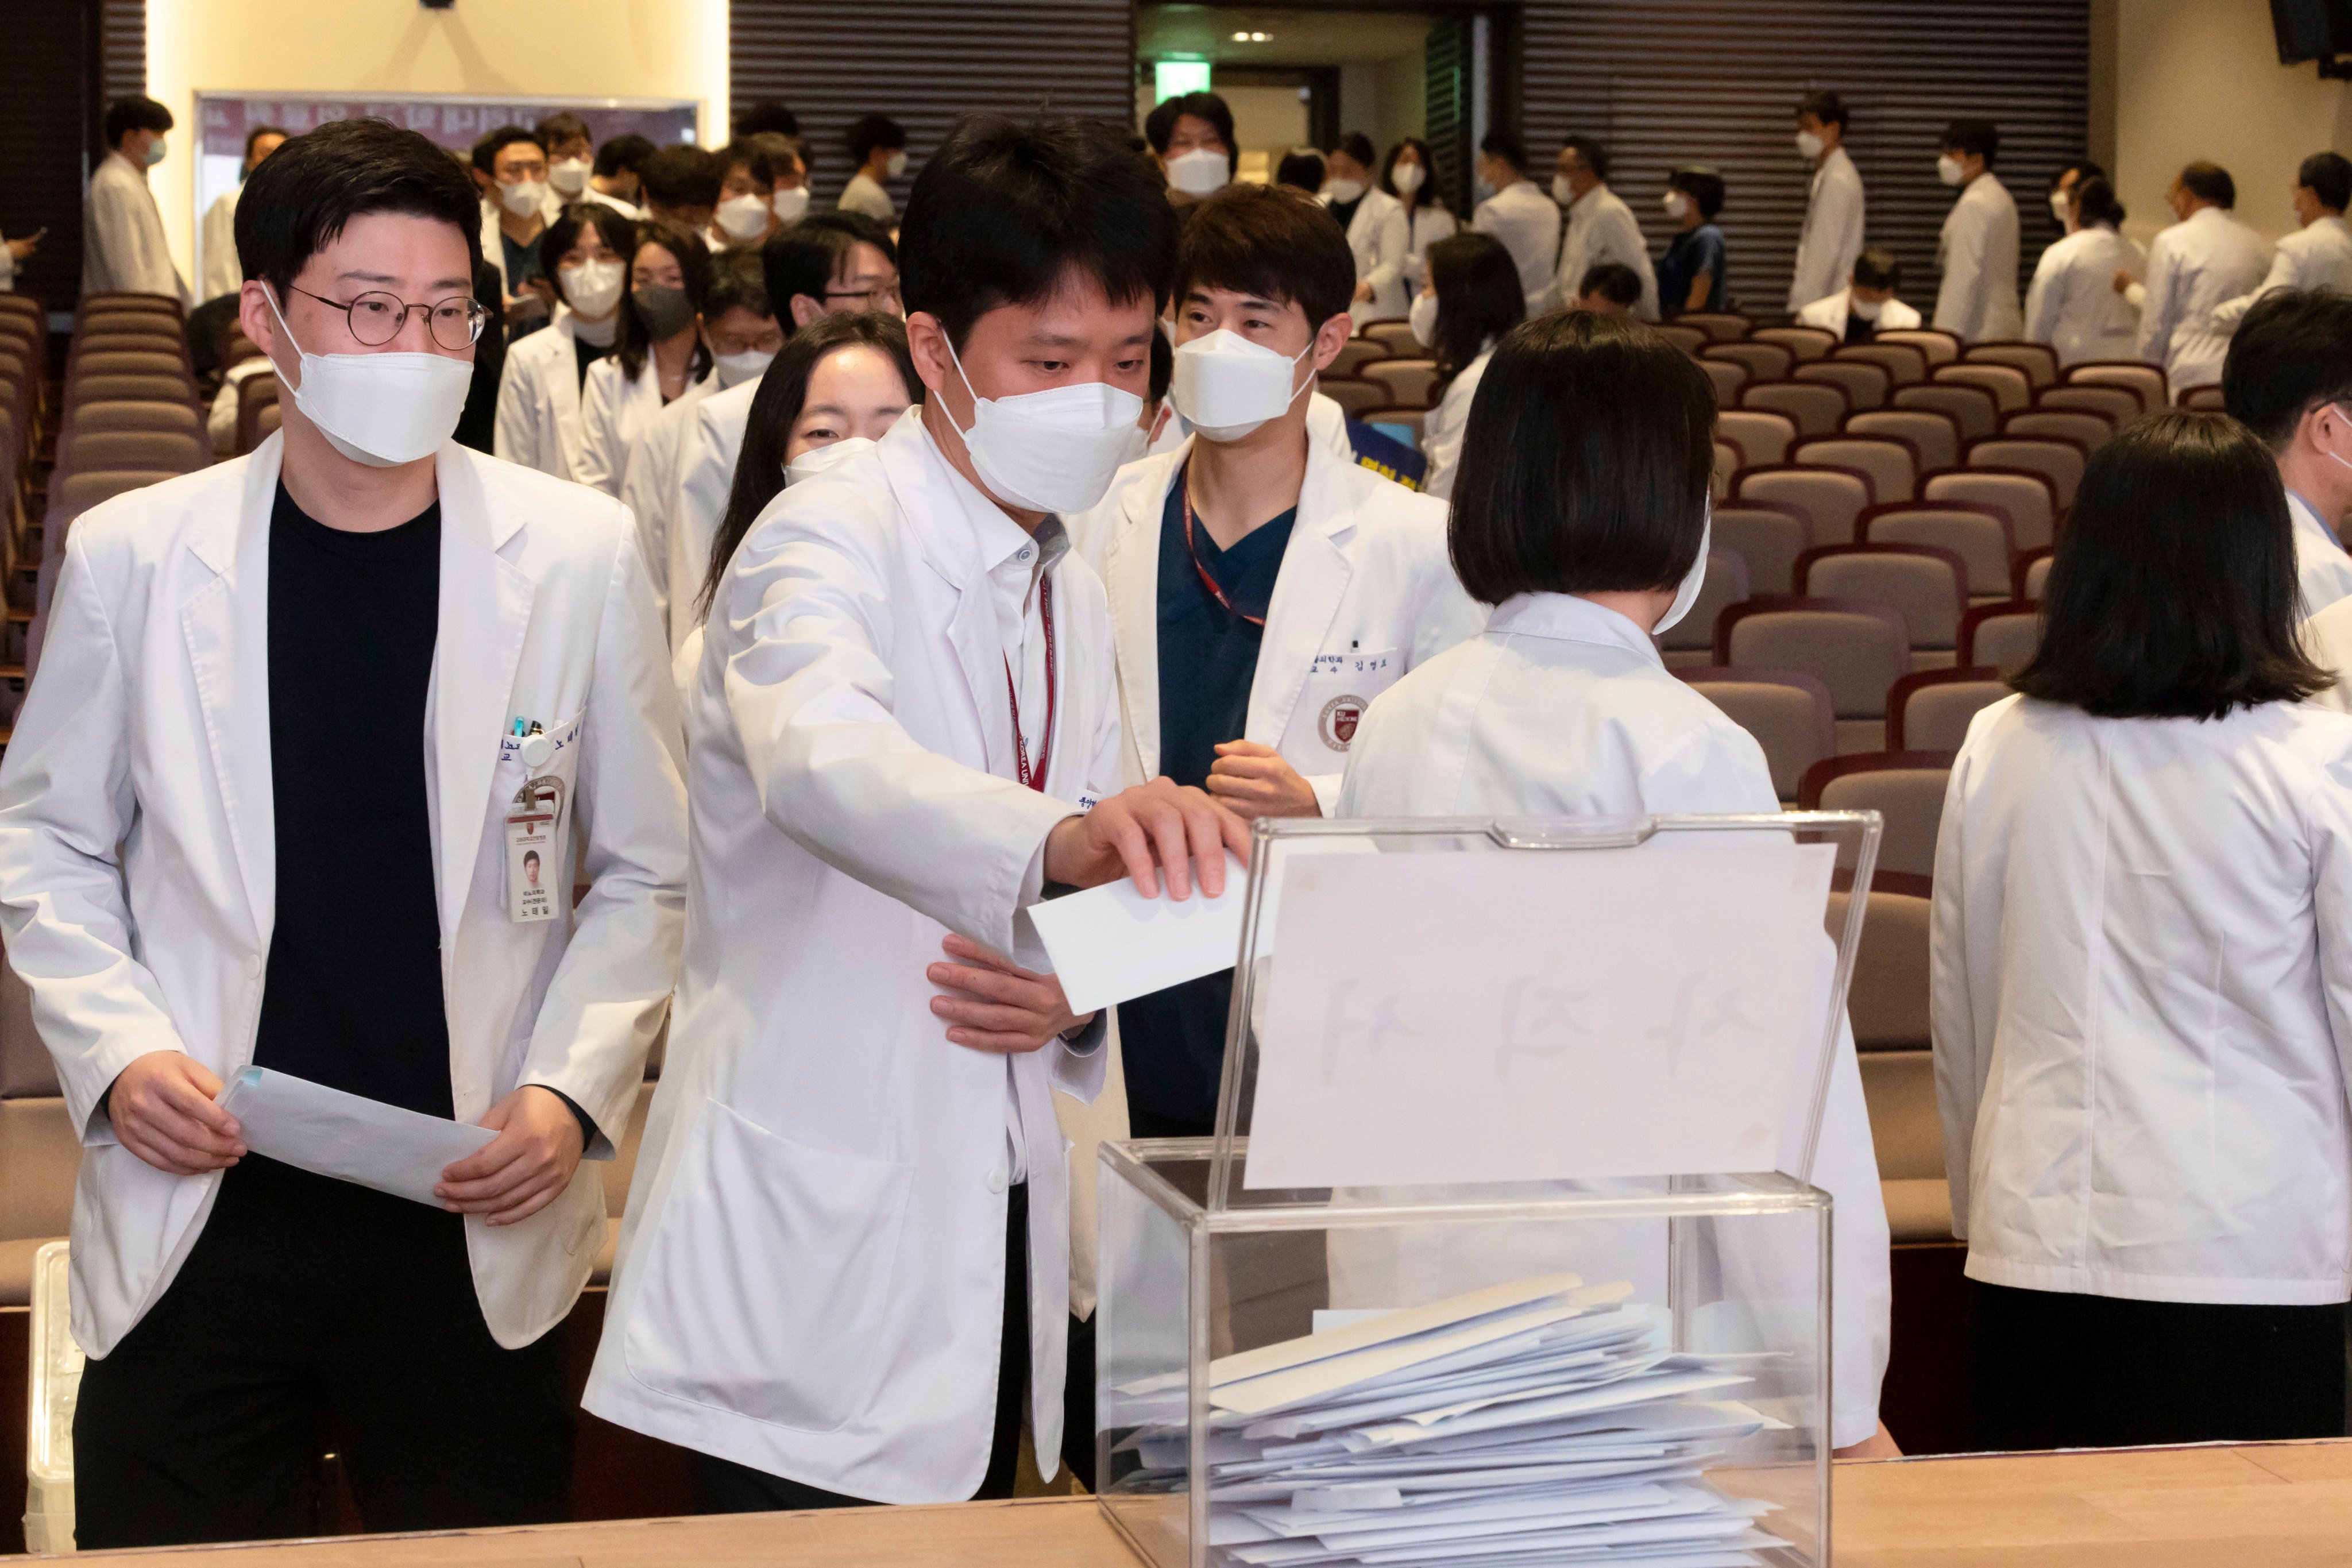 Medical professors queue to submit their resignations during a meeting at Korea University in Seoul, South Korea, on Monday. Photo: AP